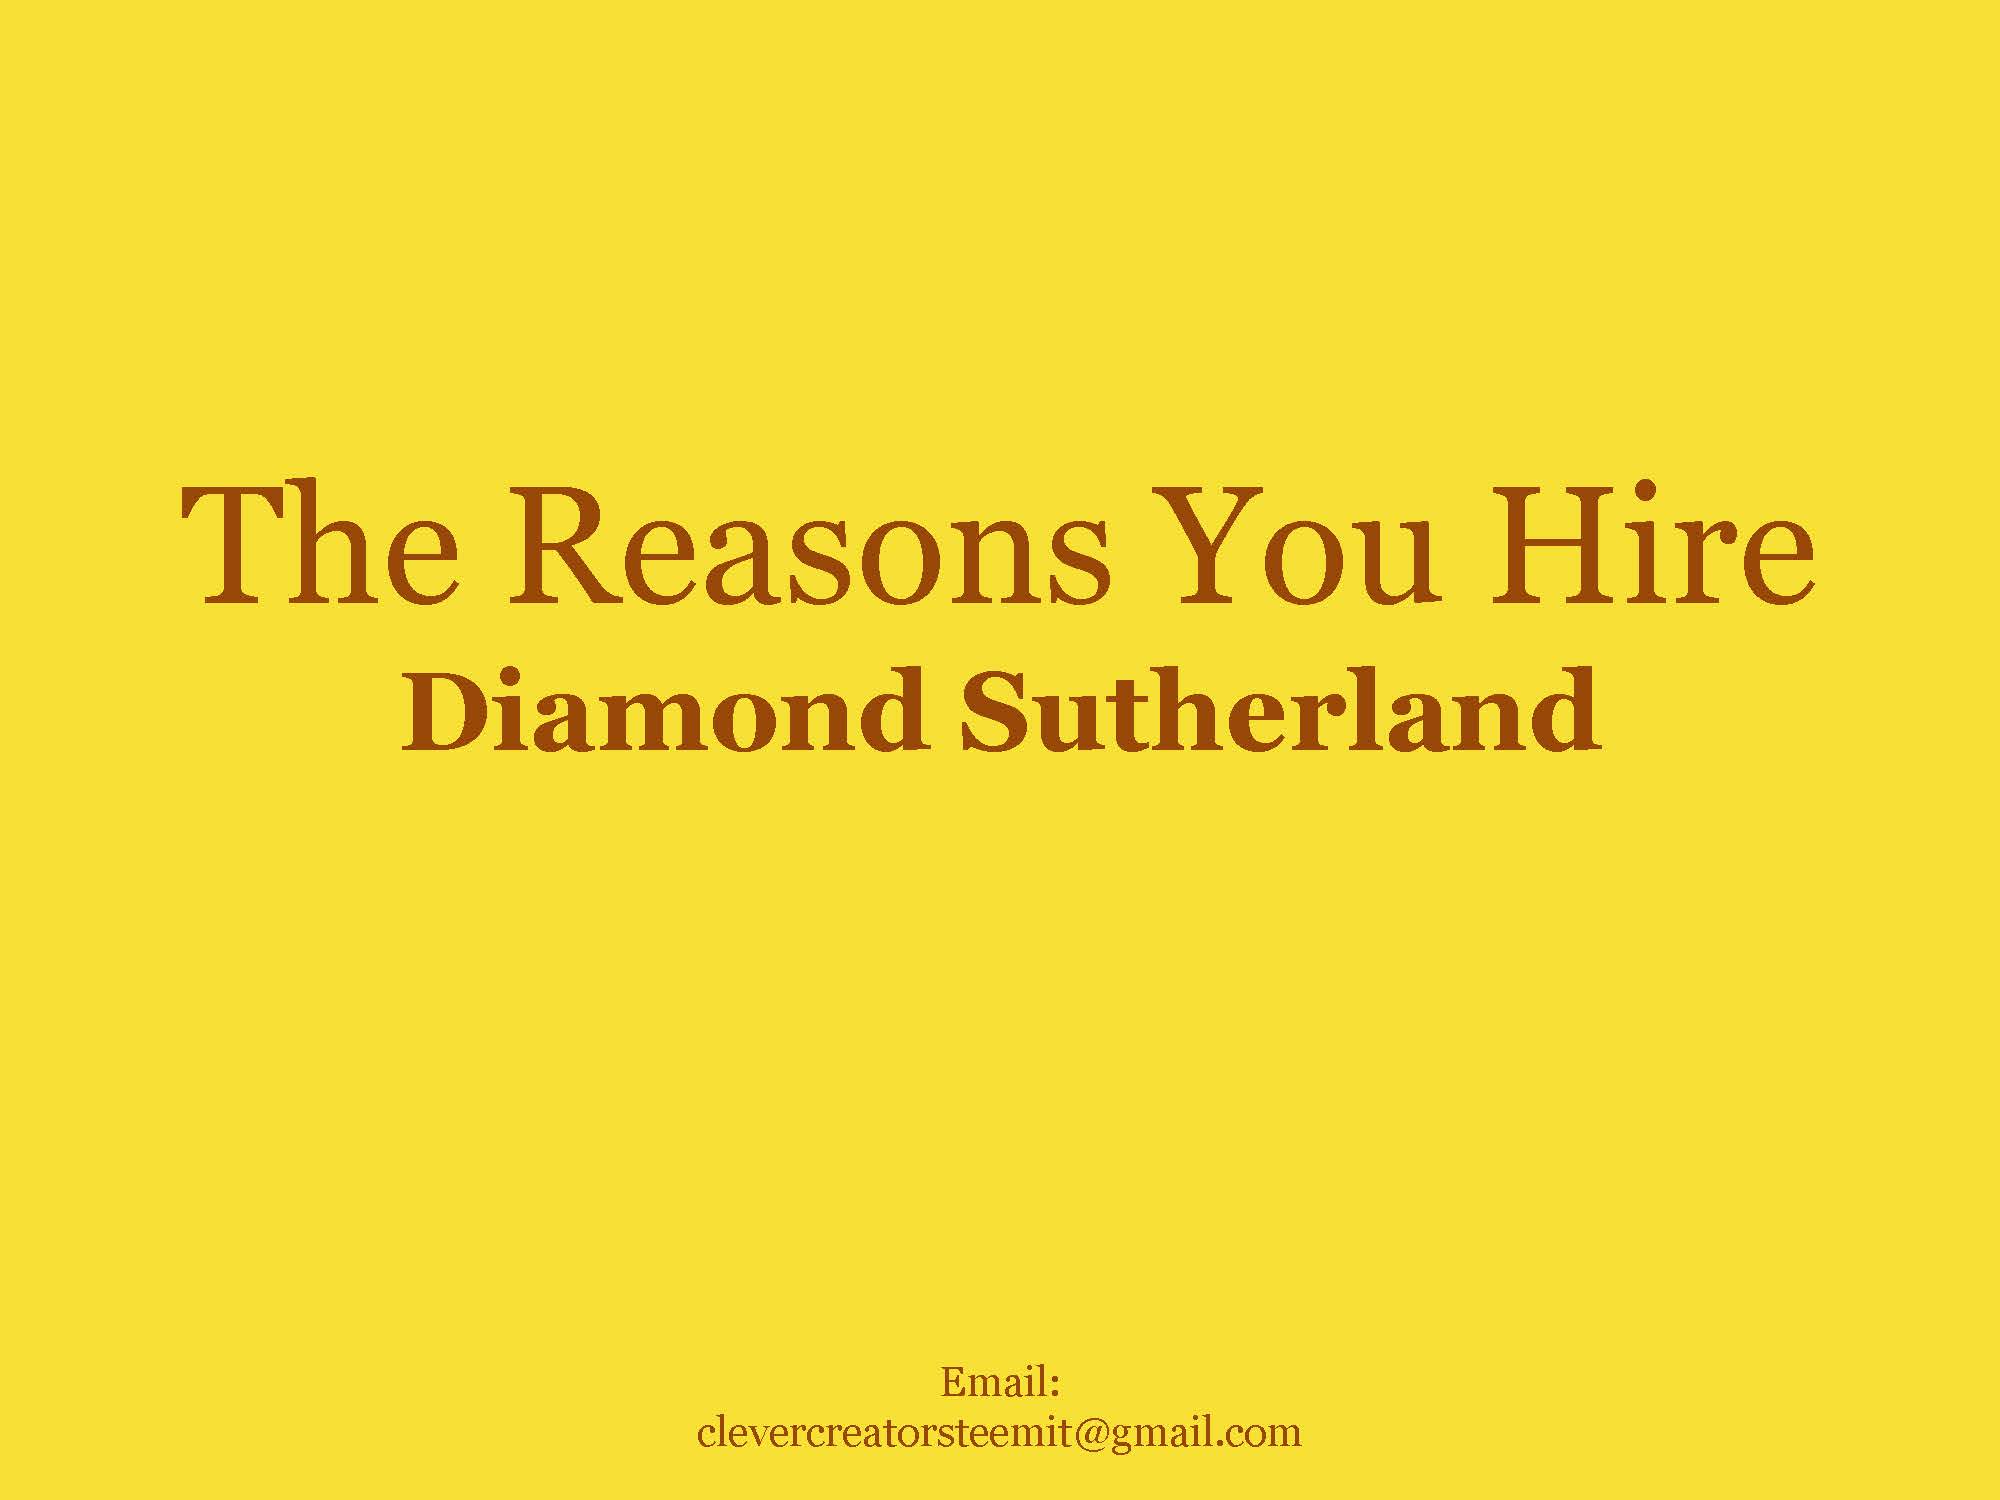 The Reasons You Hire Diamond Sutherland_Page_1.jpg